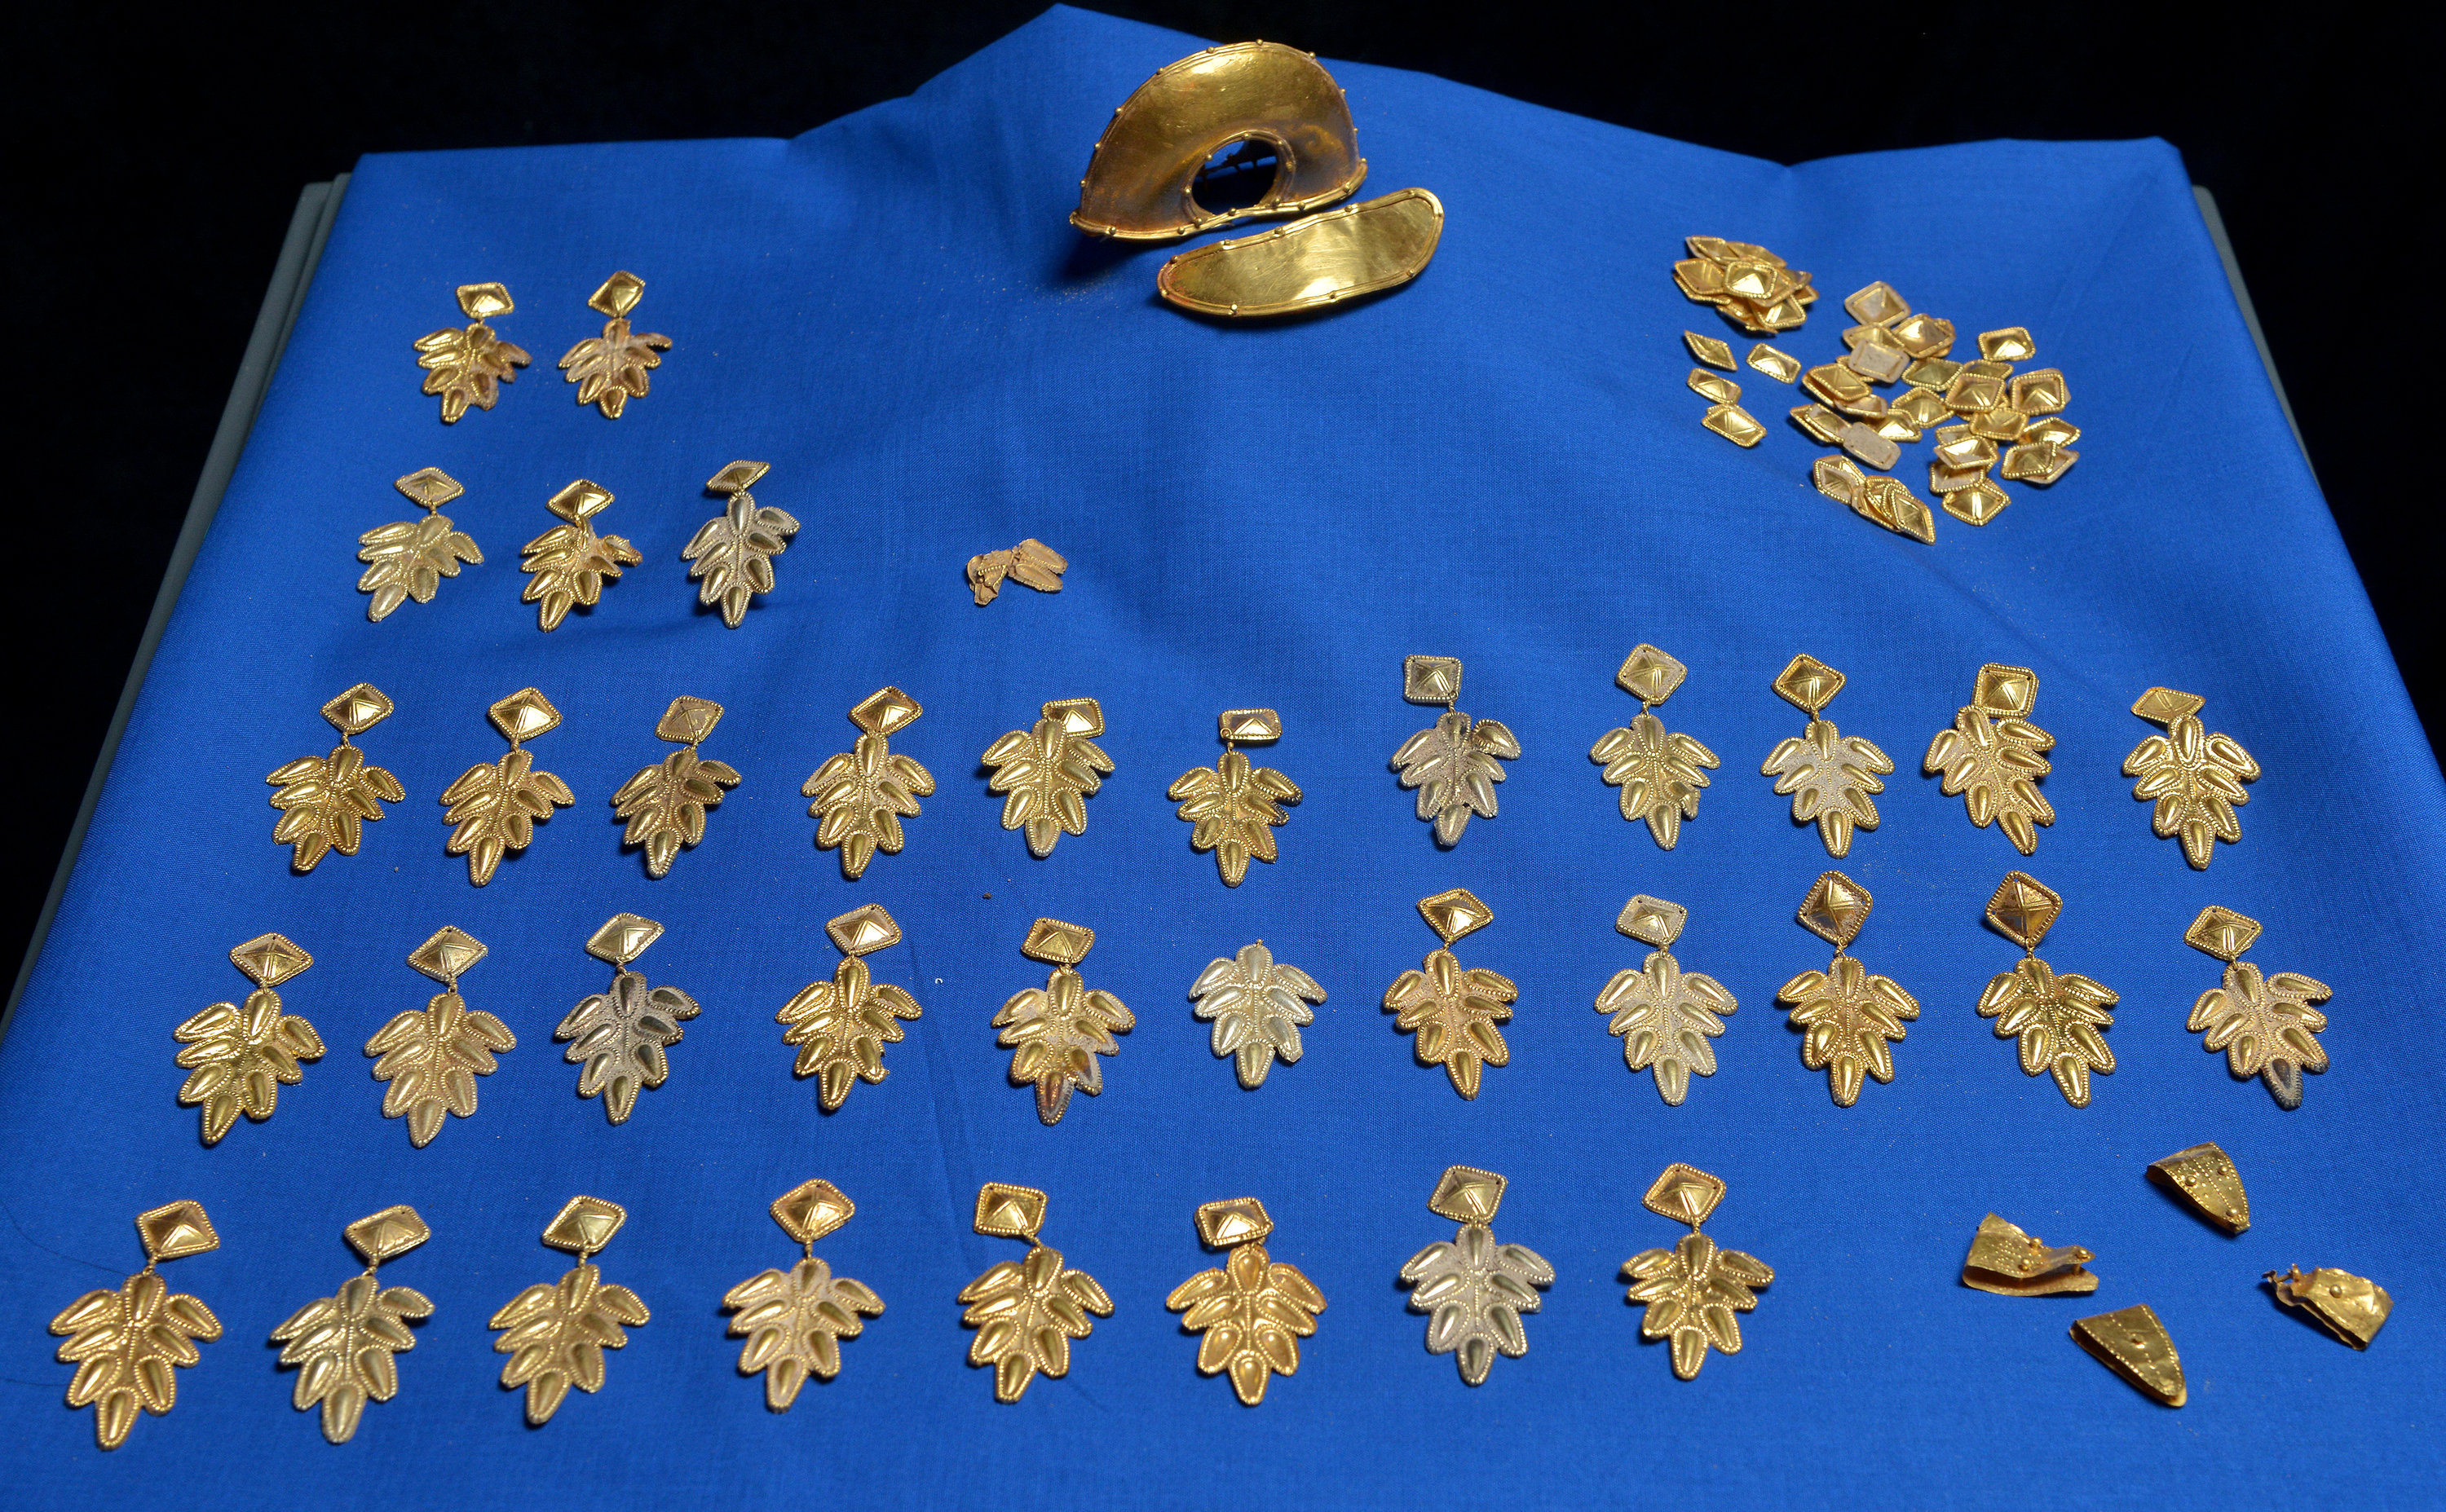 Looter caught with Roman gold, silver hoard – The History Blog